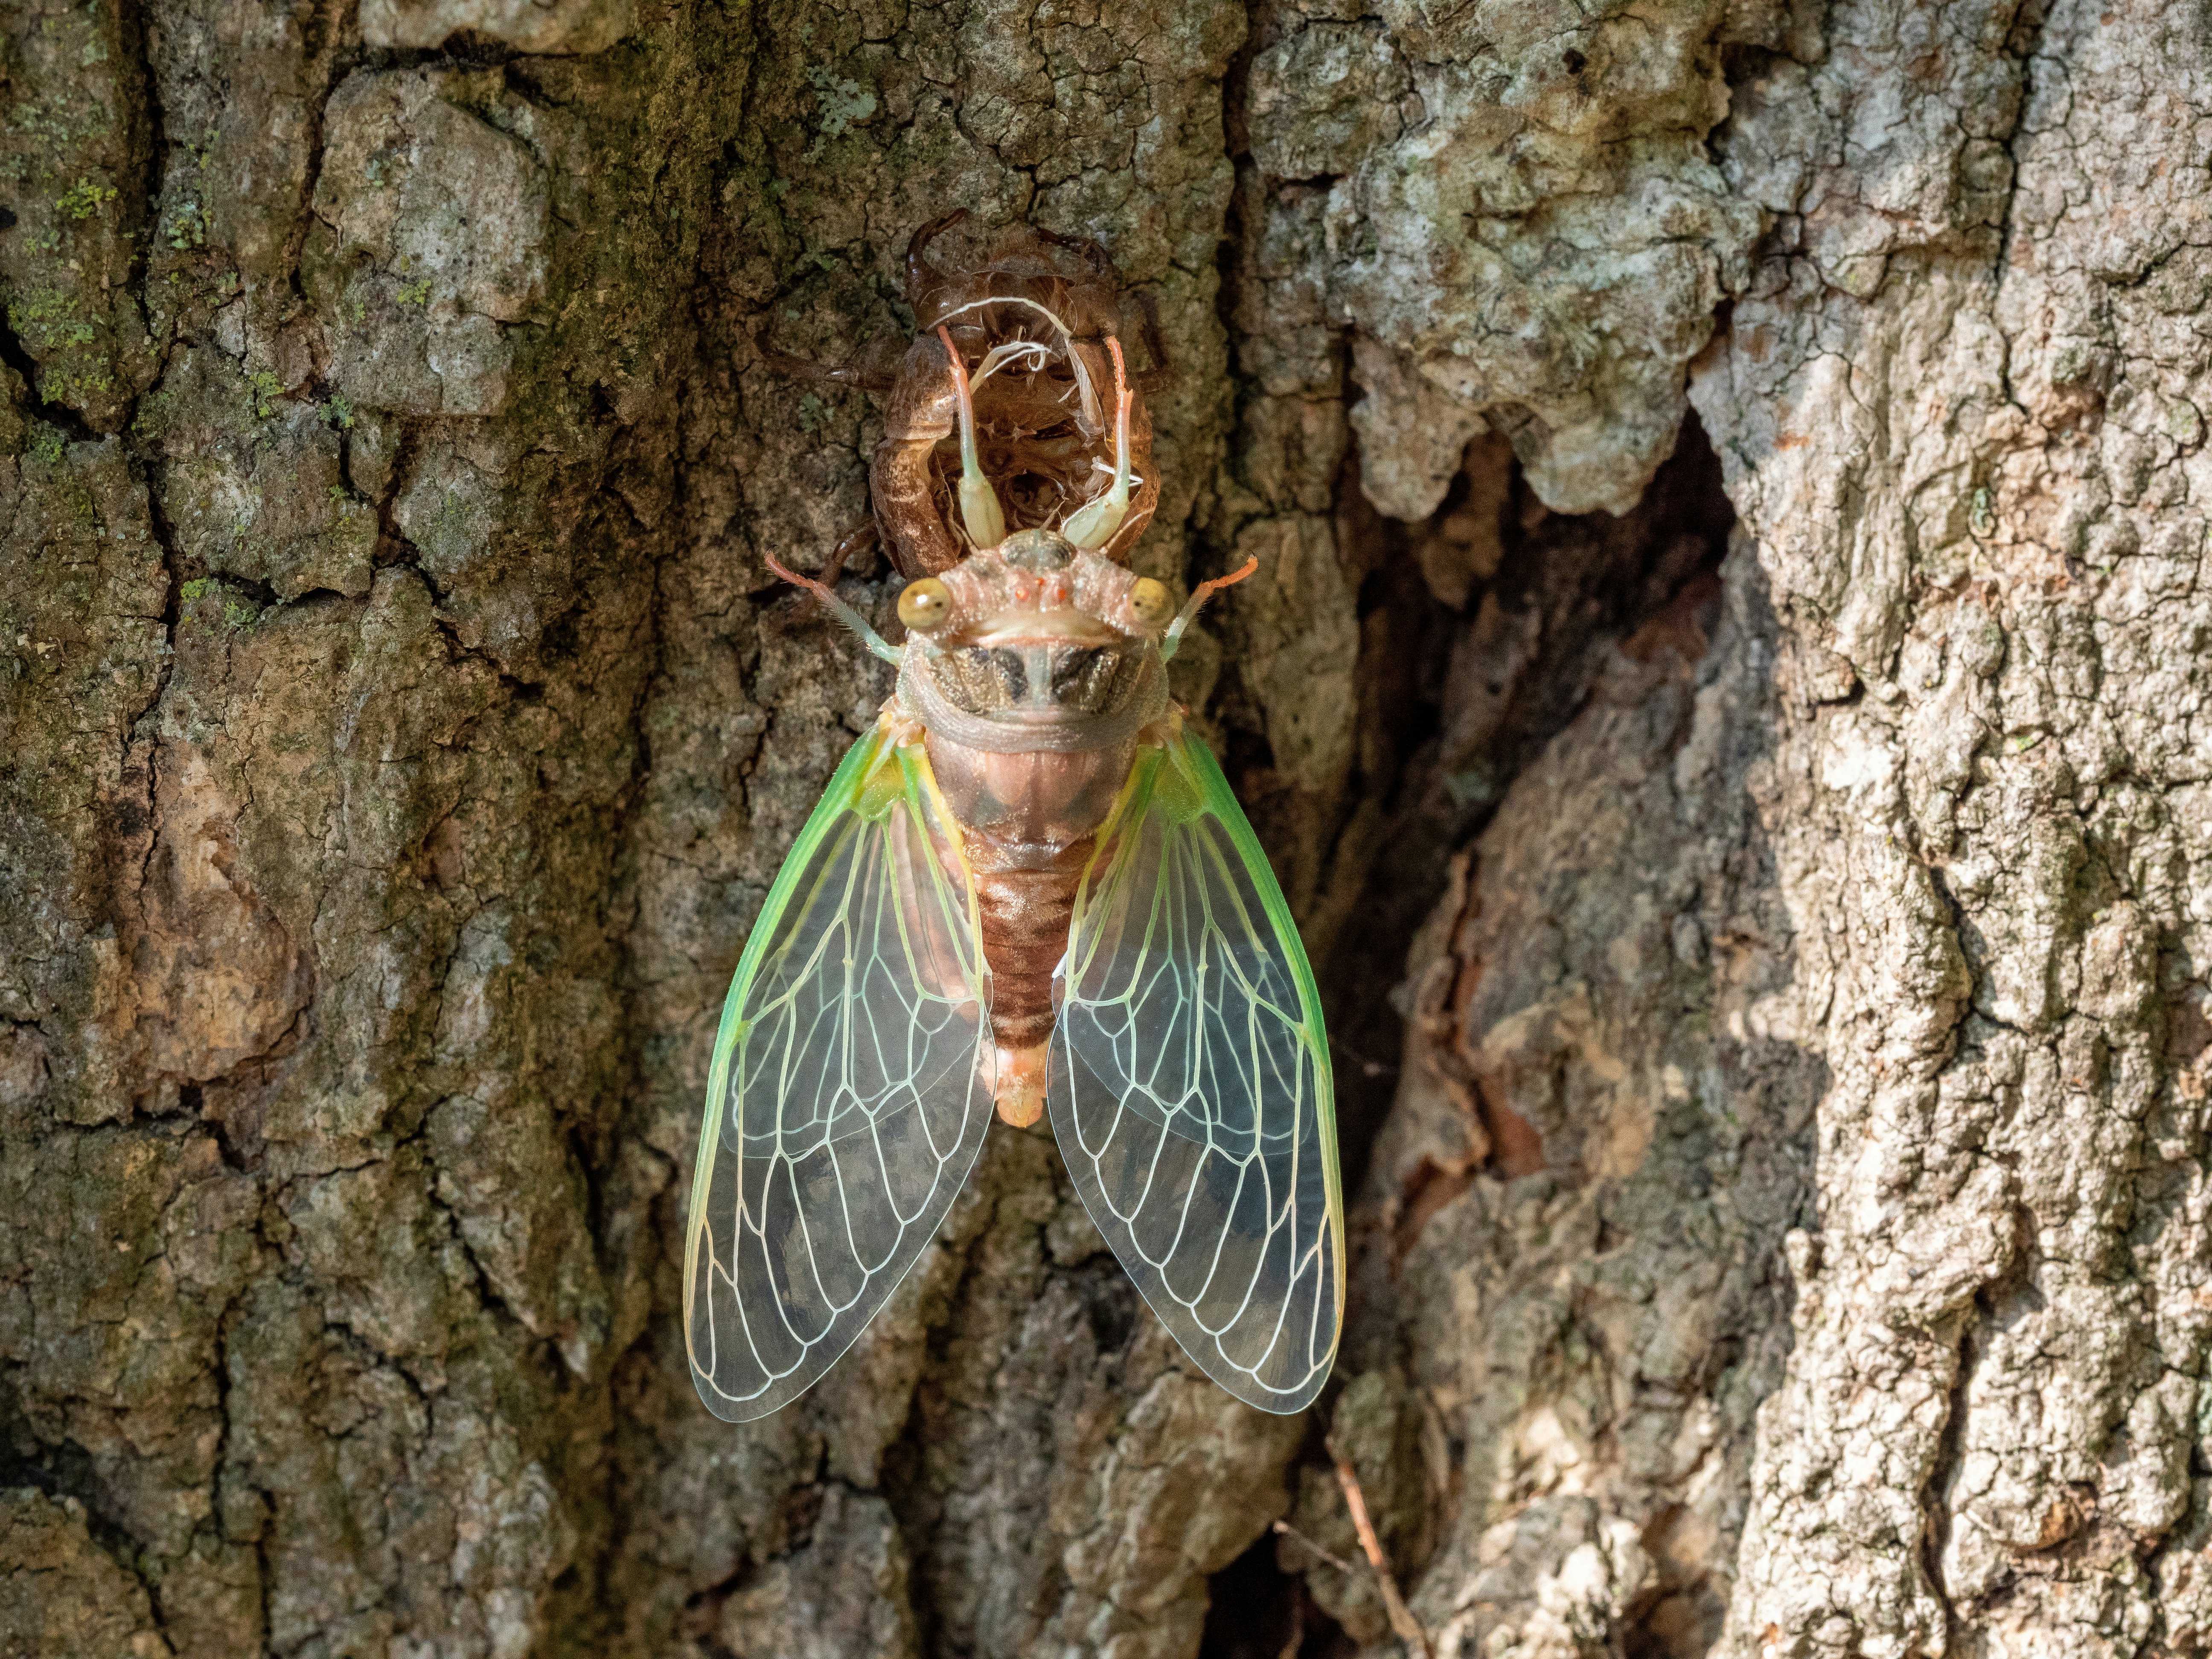  Only Once Every 221 Years: How Scientists Predict This Rare Clash of Cicada Broods Will Go Down